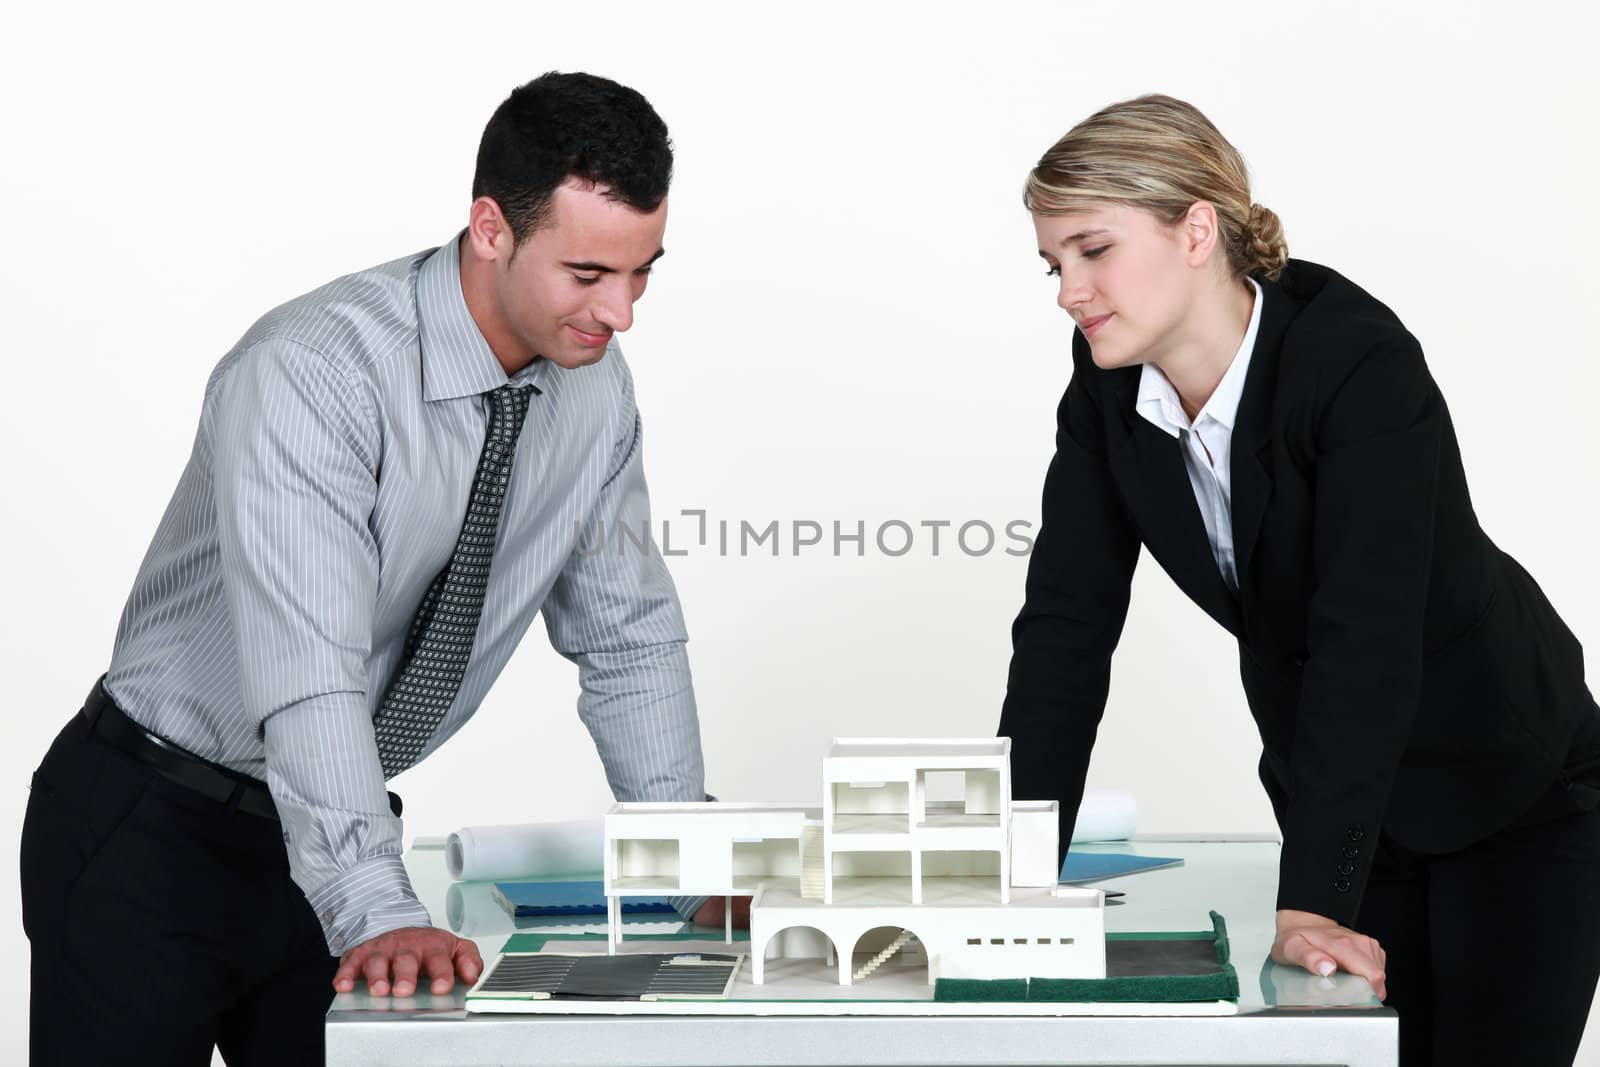 Architects looking at a 3D model by phovoir